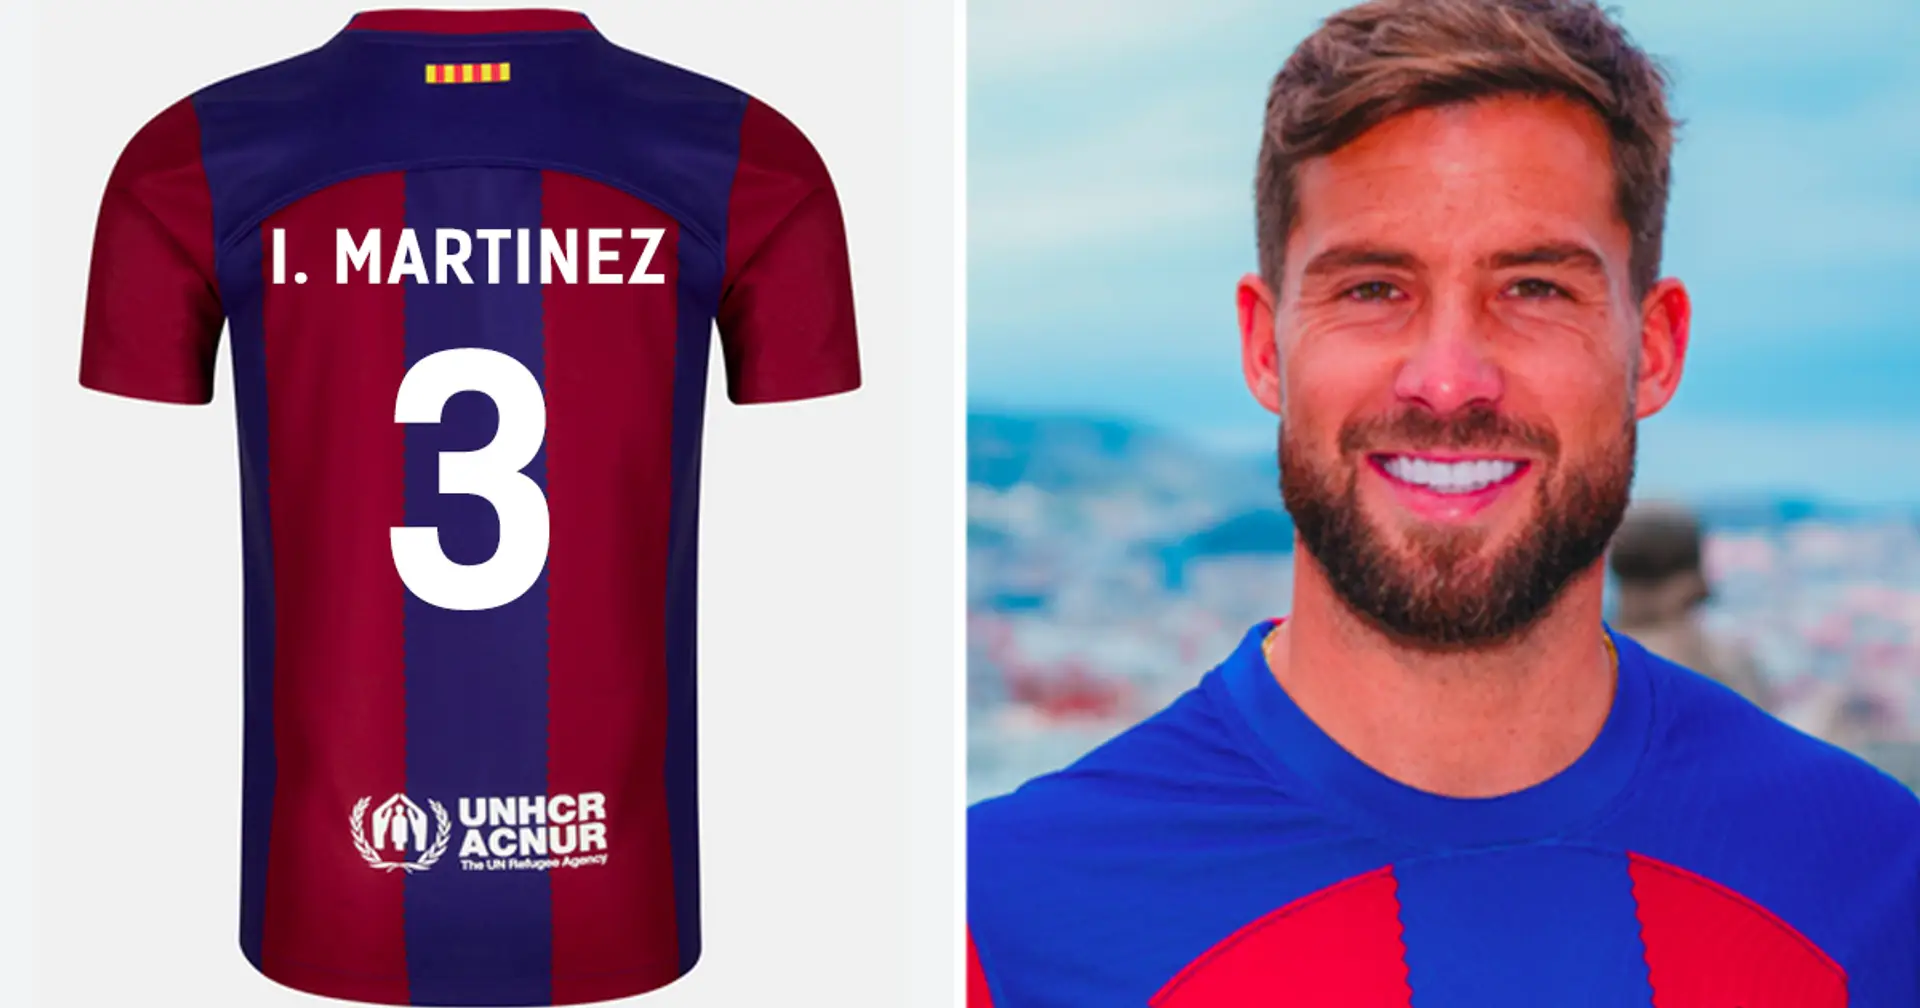 7 jersey numbers Barca can offer Inigo Martinez including 3 iconic – shown in pics